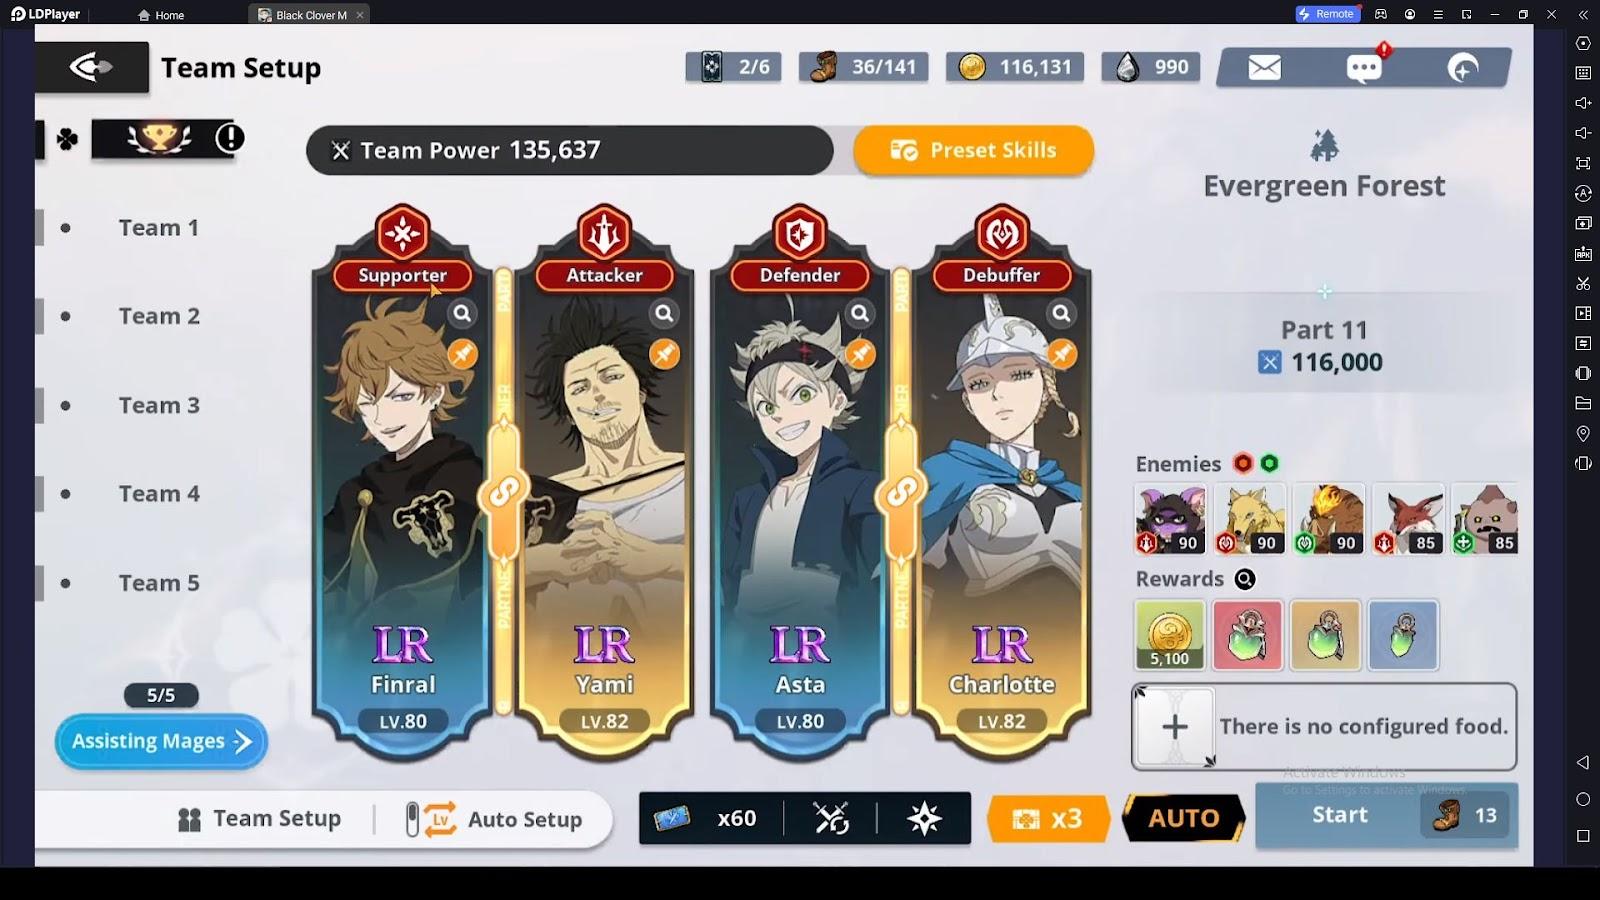 How to Get the Best Units to Build the Best Teams